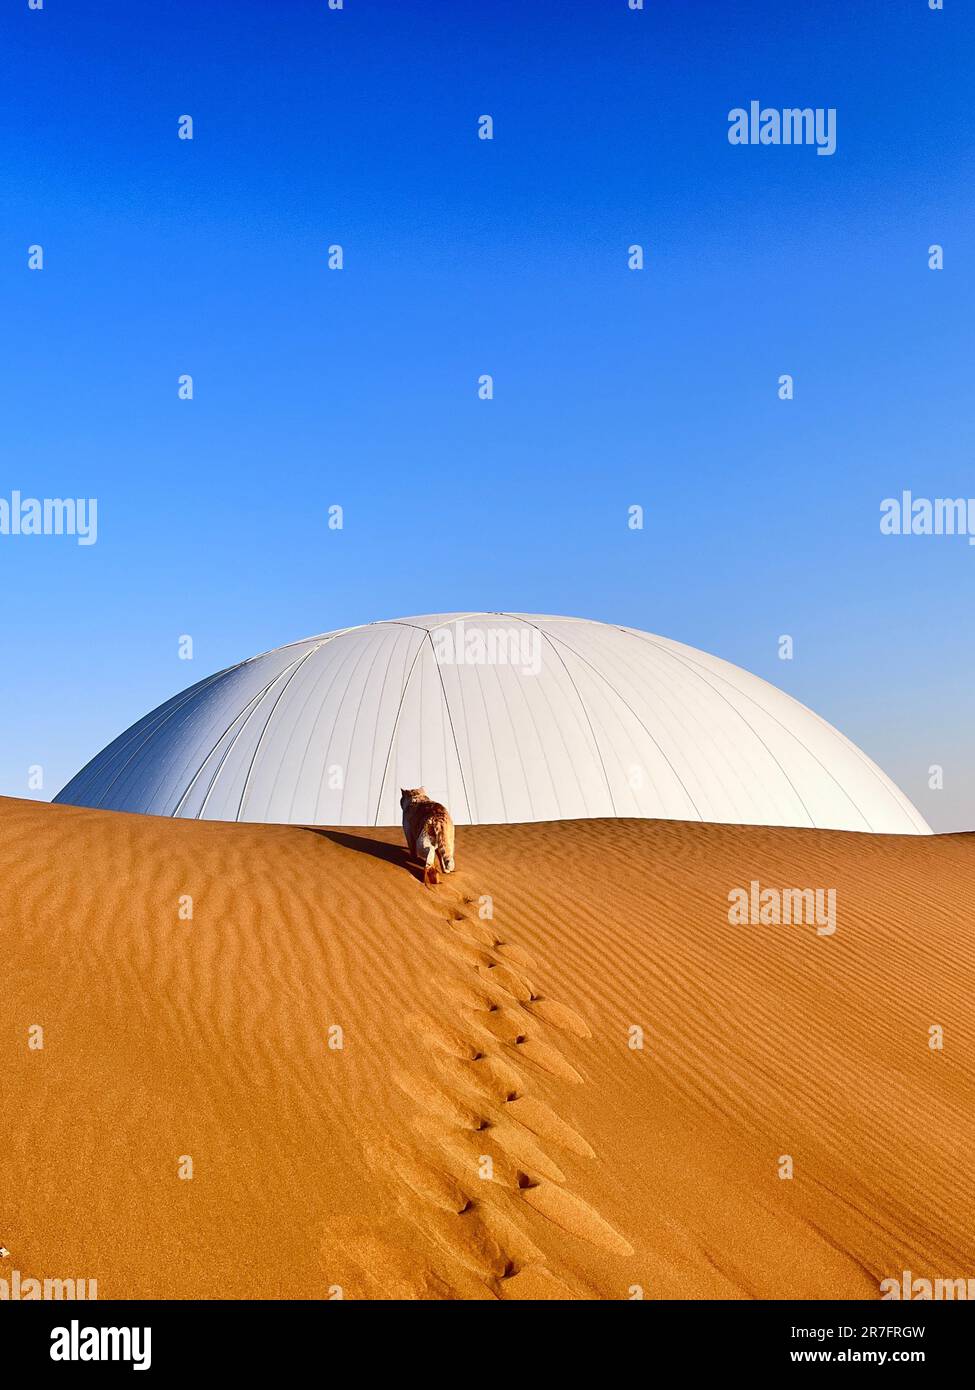 A cat walking on the arid desert sand with a majestic domed structure in the background Stock Photo